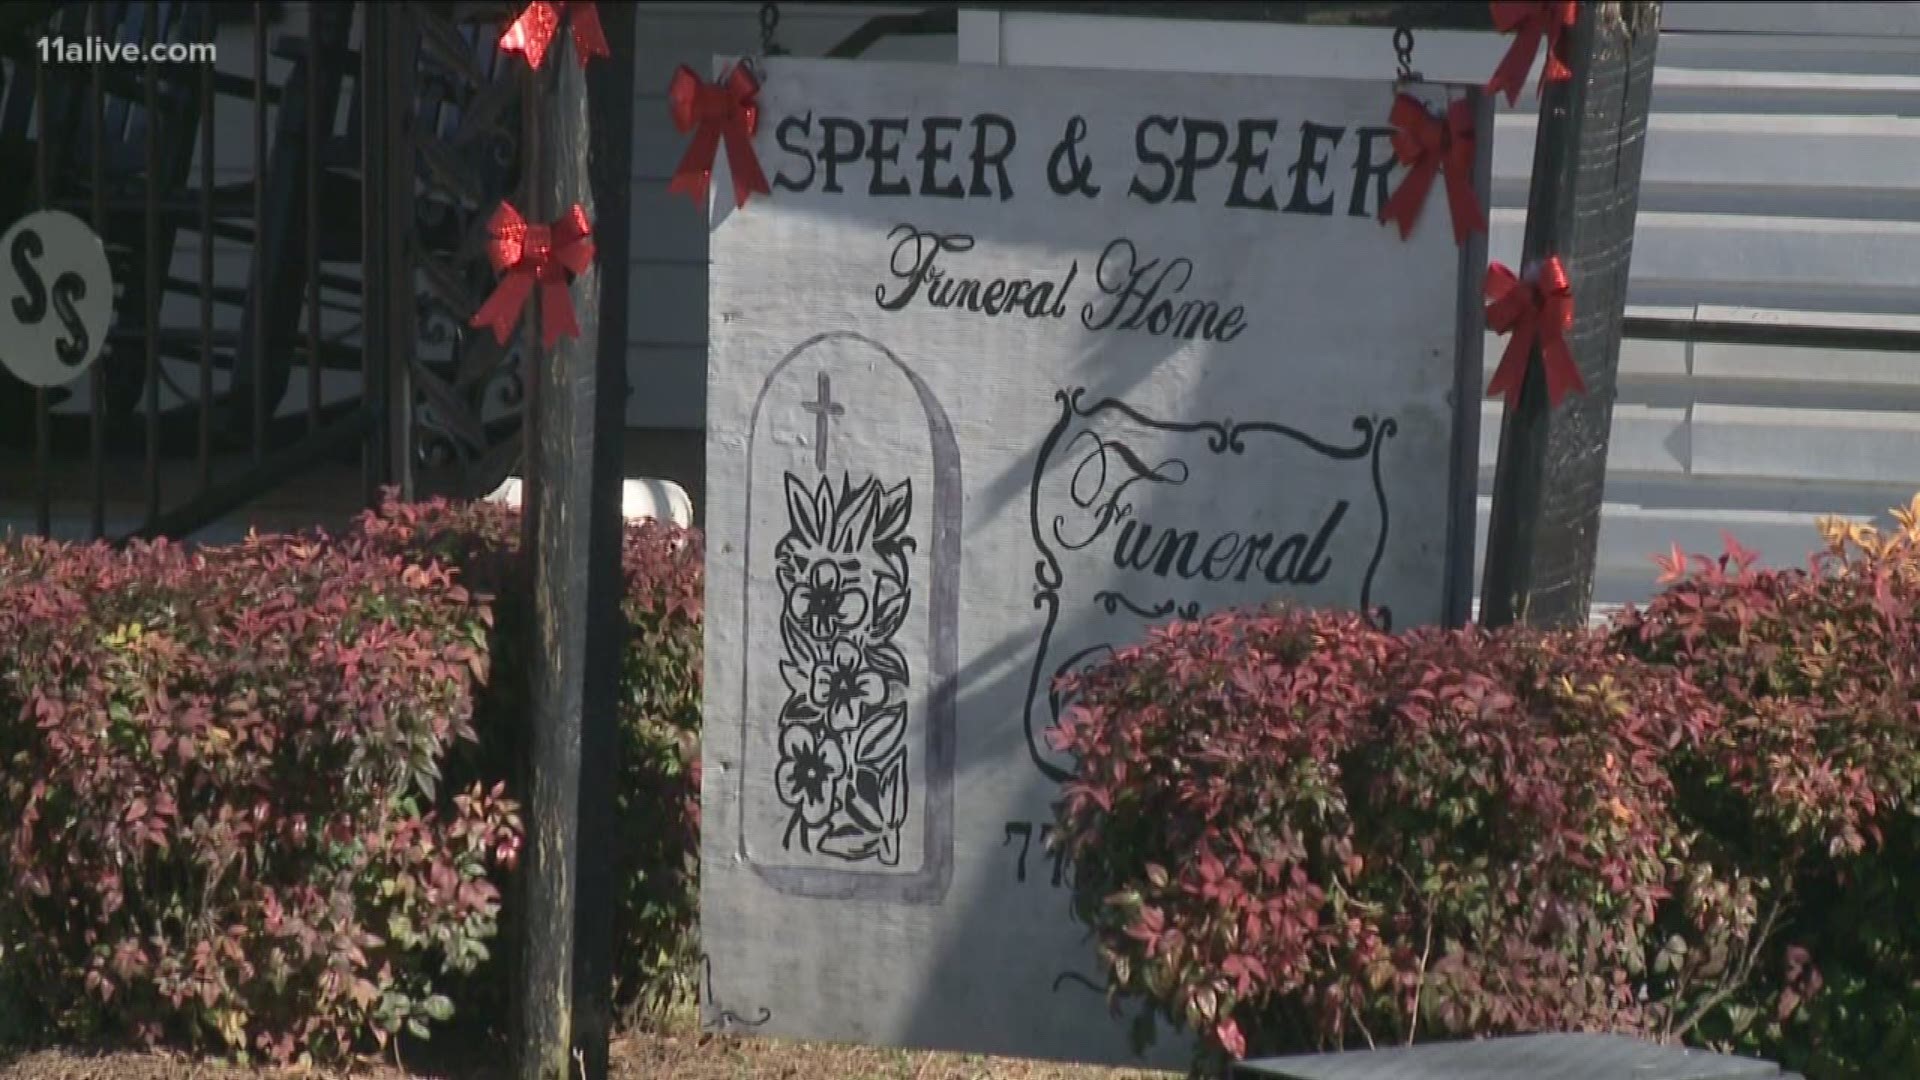 Southern Regional Hospital said it plans to file a defamation lawsuit after a family claims it sent the wrong body to a funeral home for cremation.